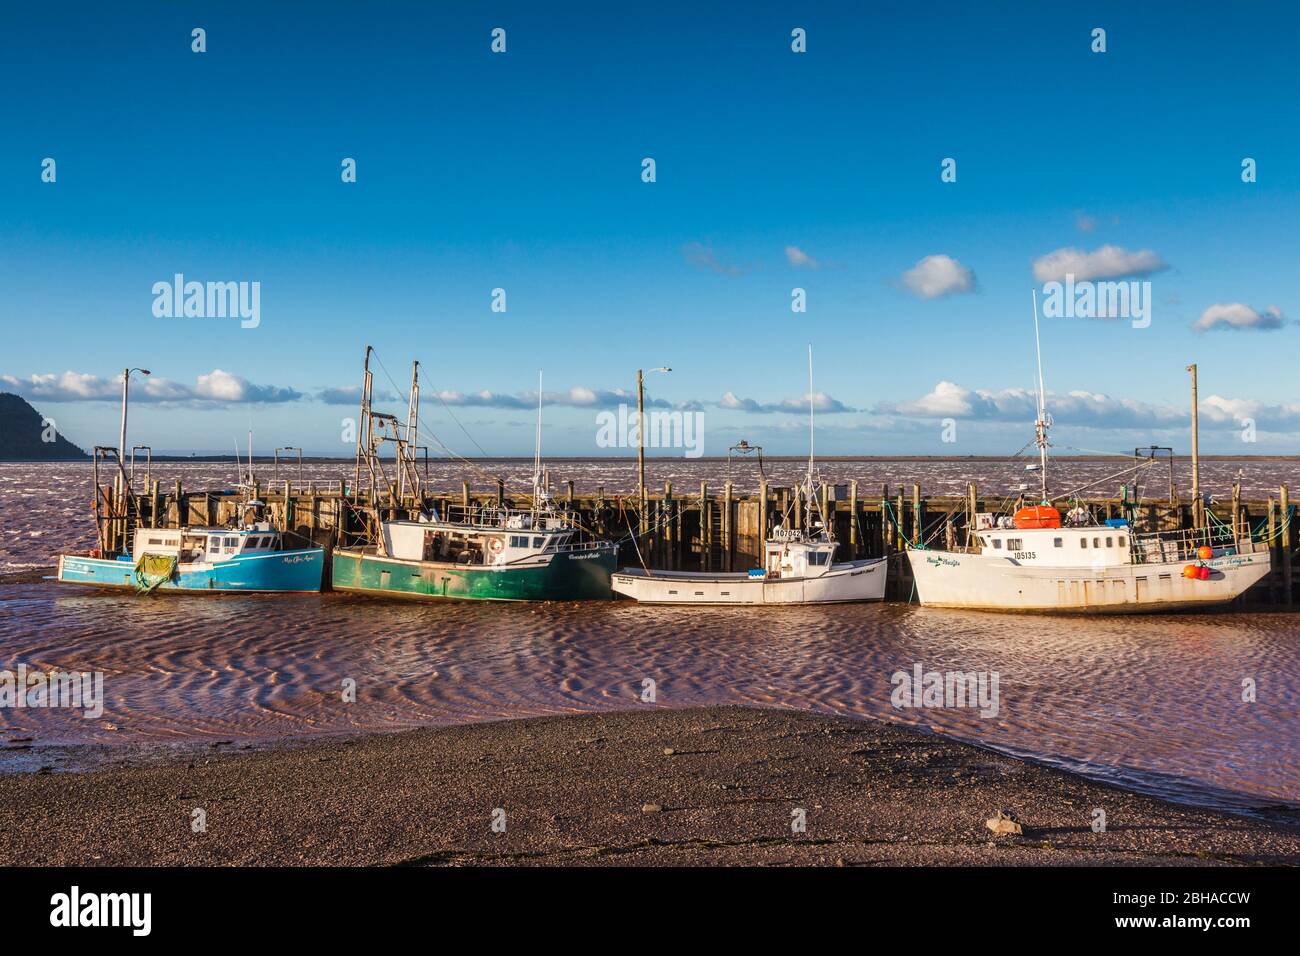 Canada, Nova Scotia, Advocate Harbour, fishing harbor on the Bay of Fundy Stock Photo